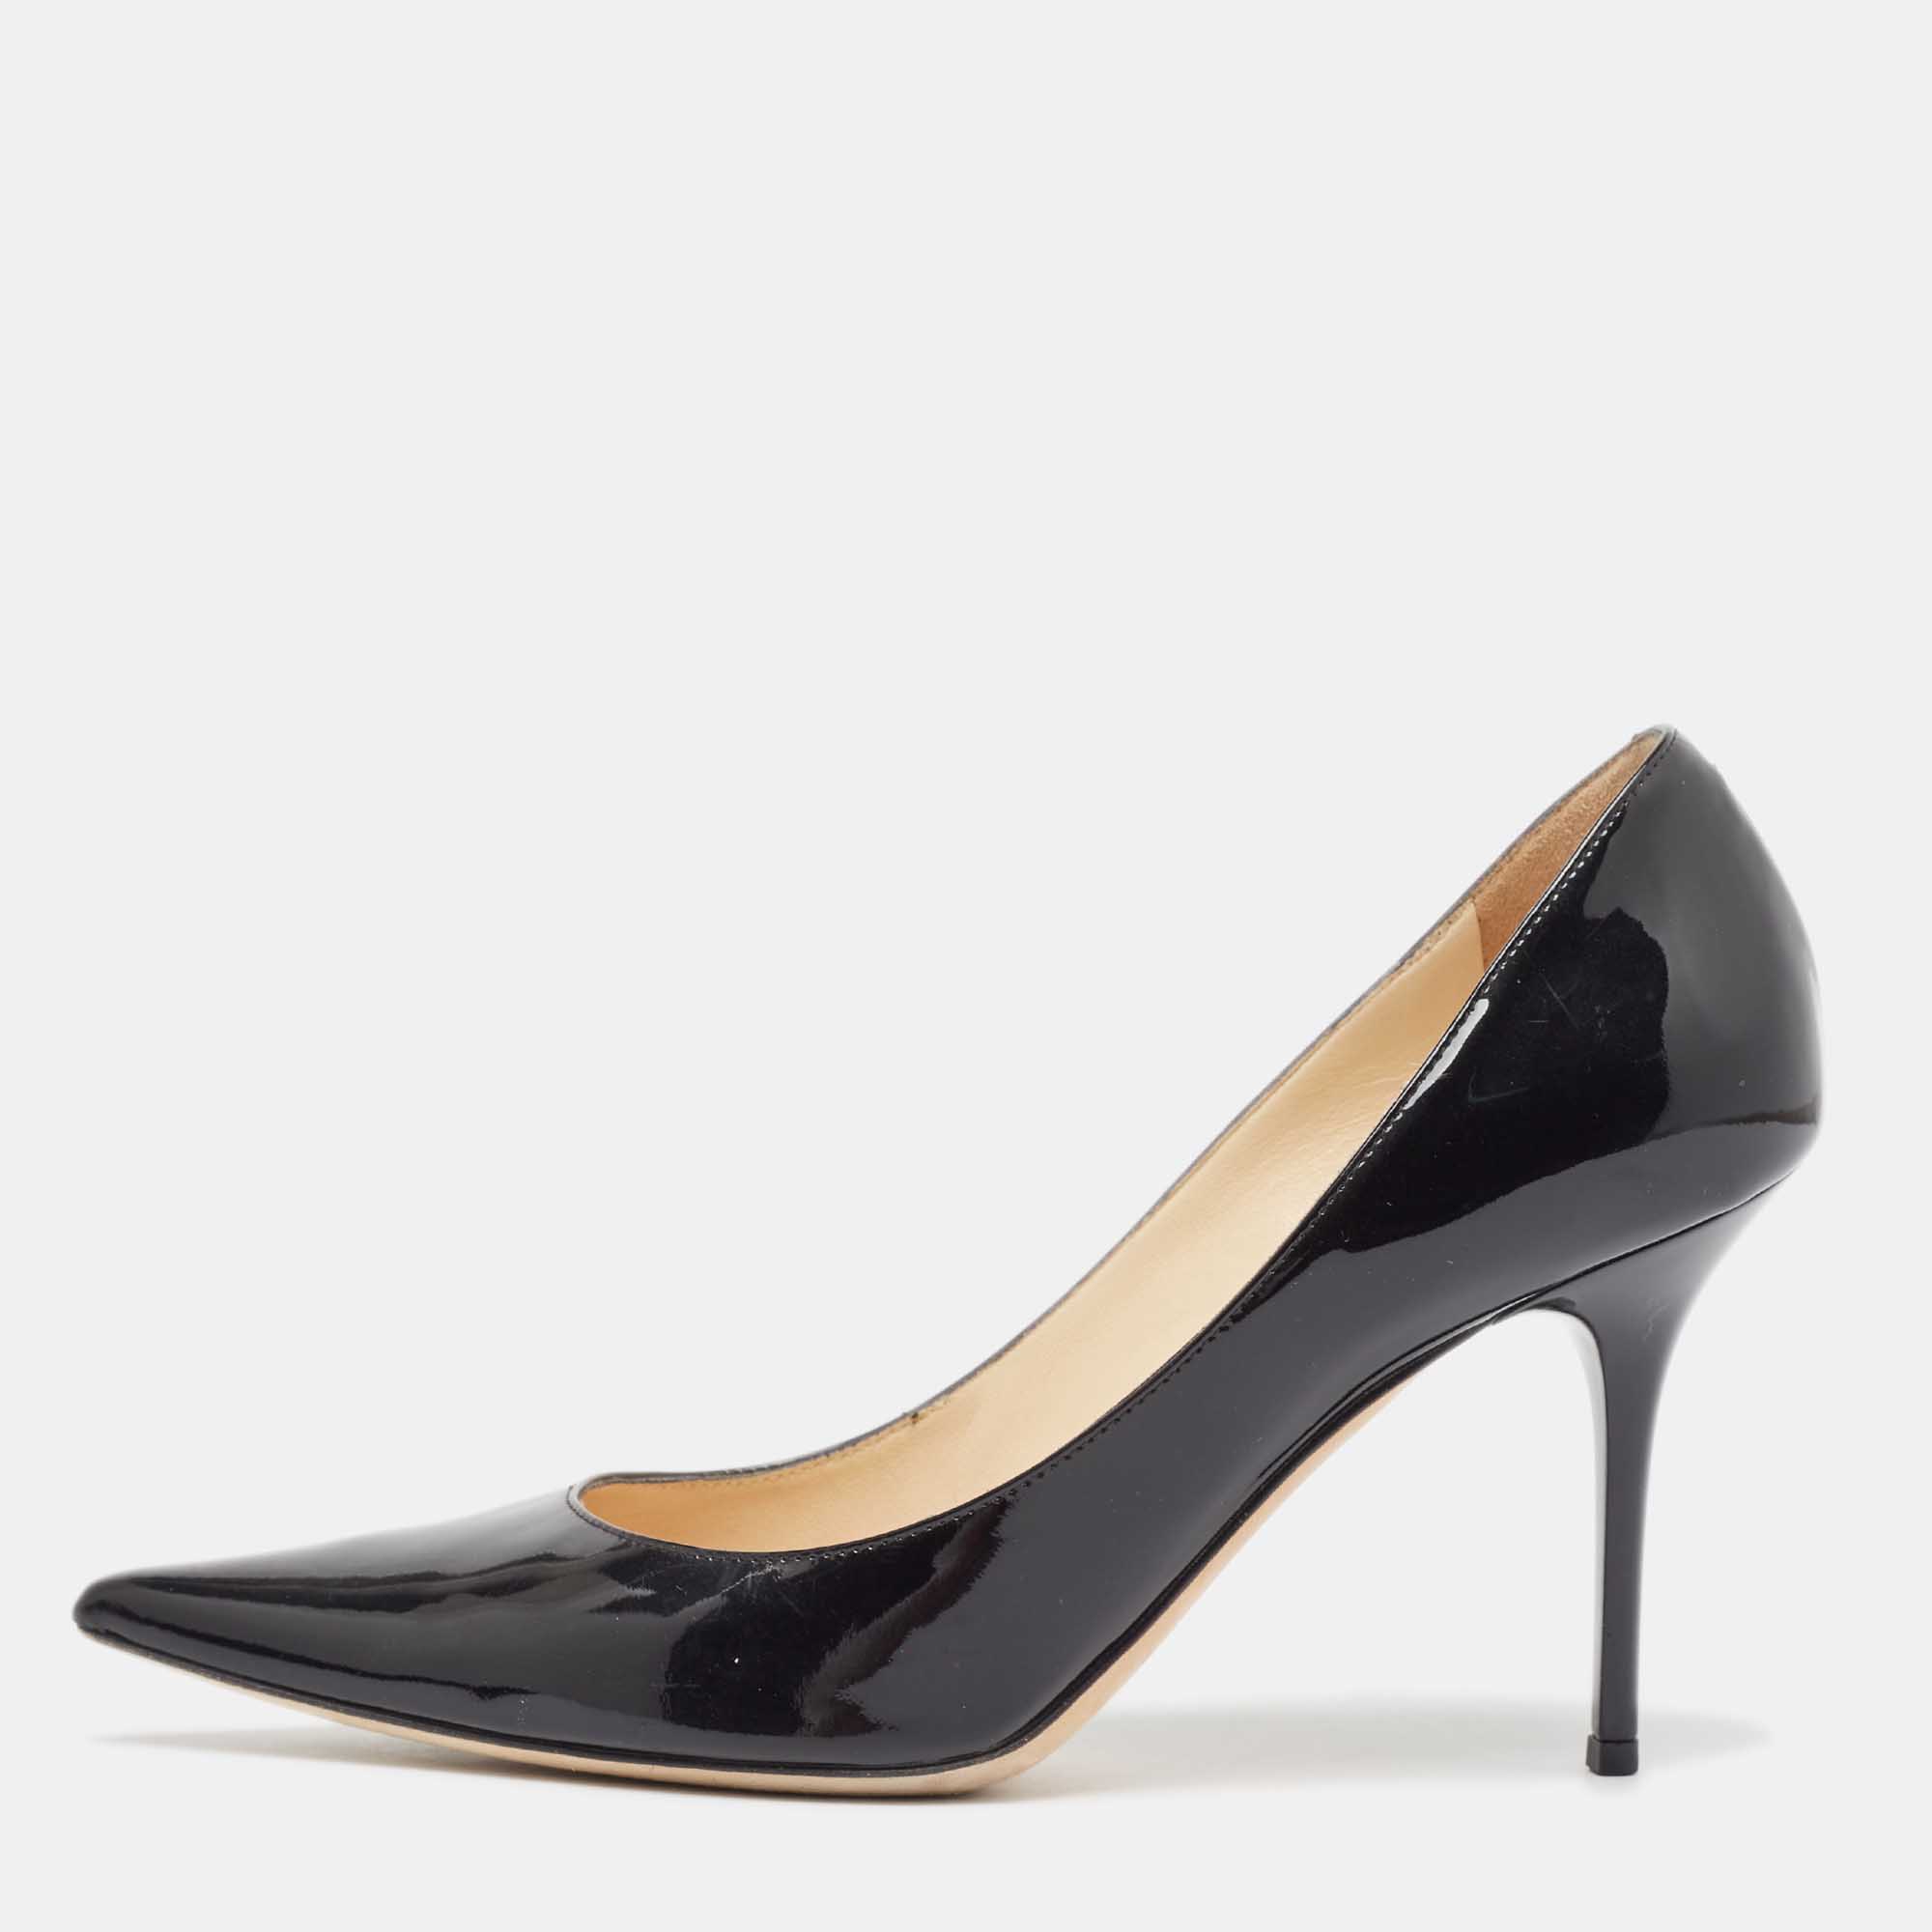 Jimmy choo black patent allure pointed toe pumps size 38